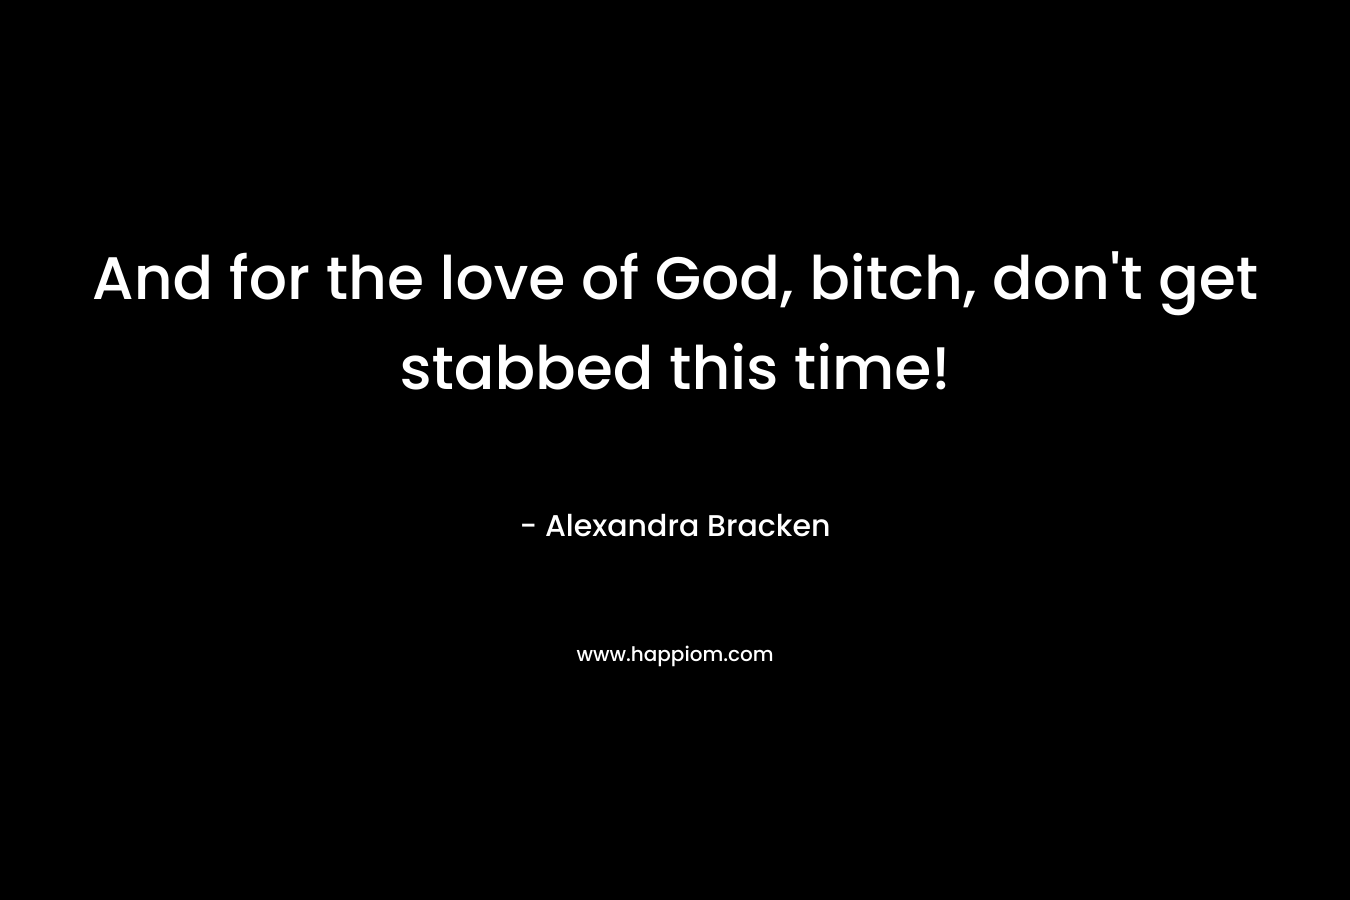 And for the love of God, bitch, don’t get stabbed this time! – Alexandra Bracken